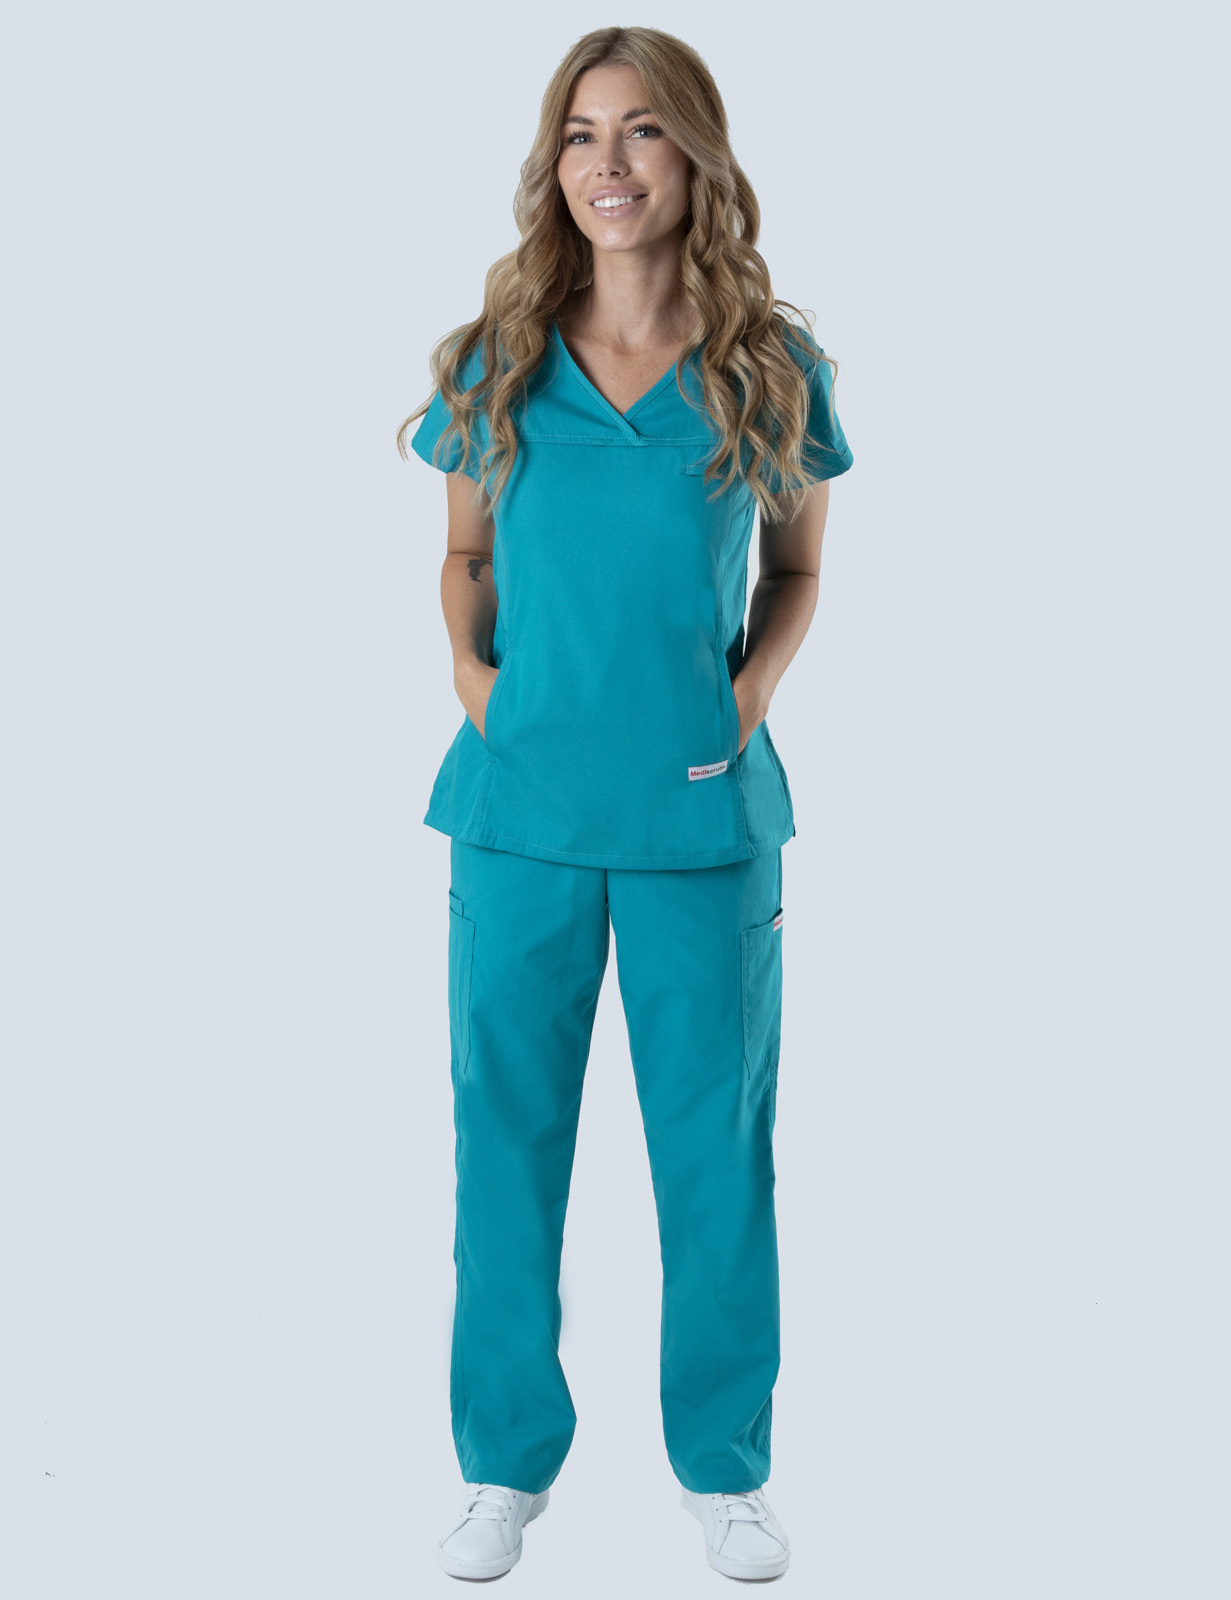 Peninsula Health - Dialysis PSA (Women's Fit Solid Scrub Top and Cargo Pants in Teal incl Logos)